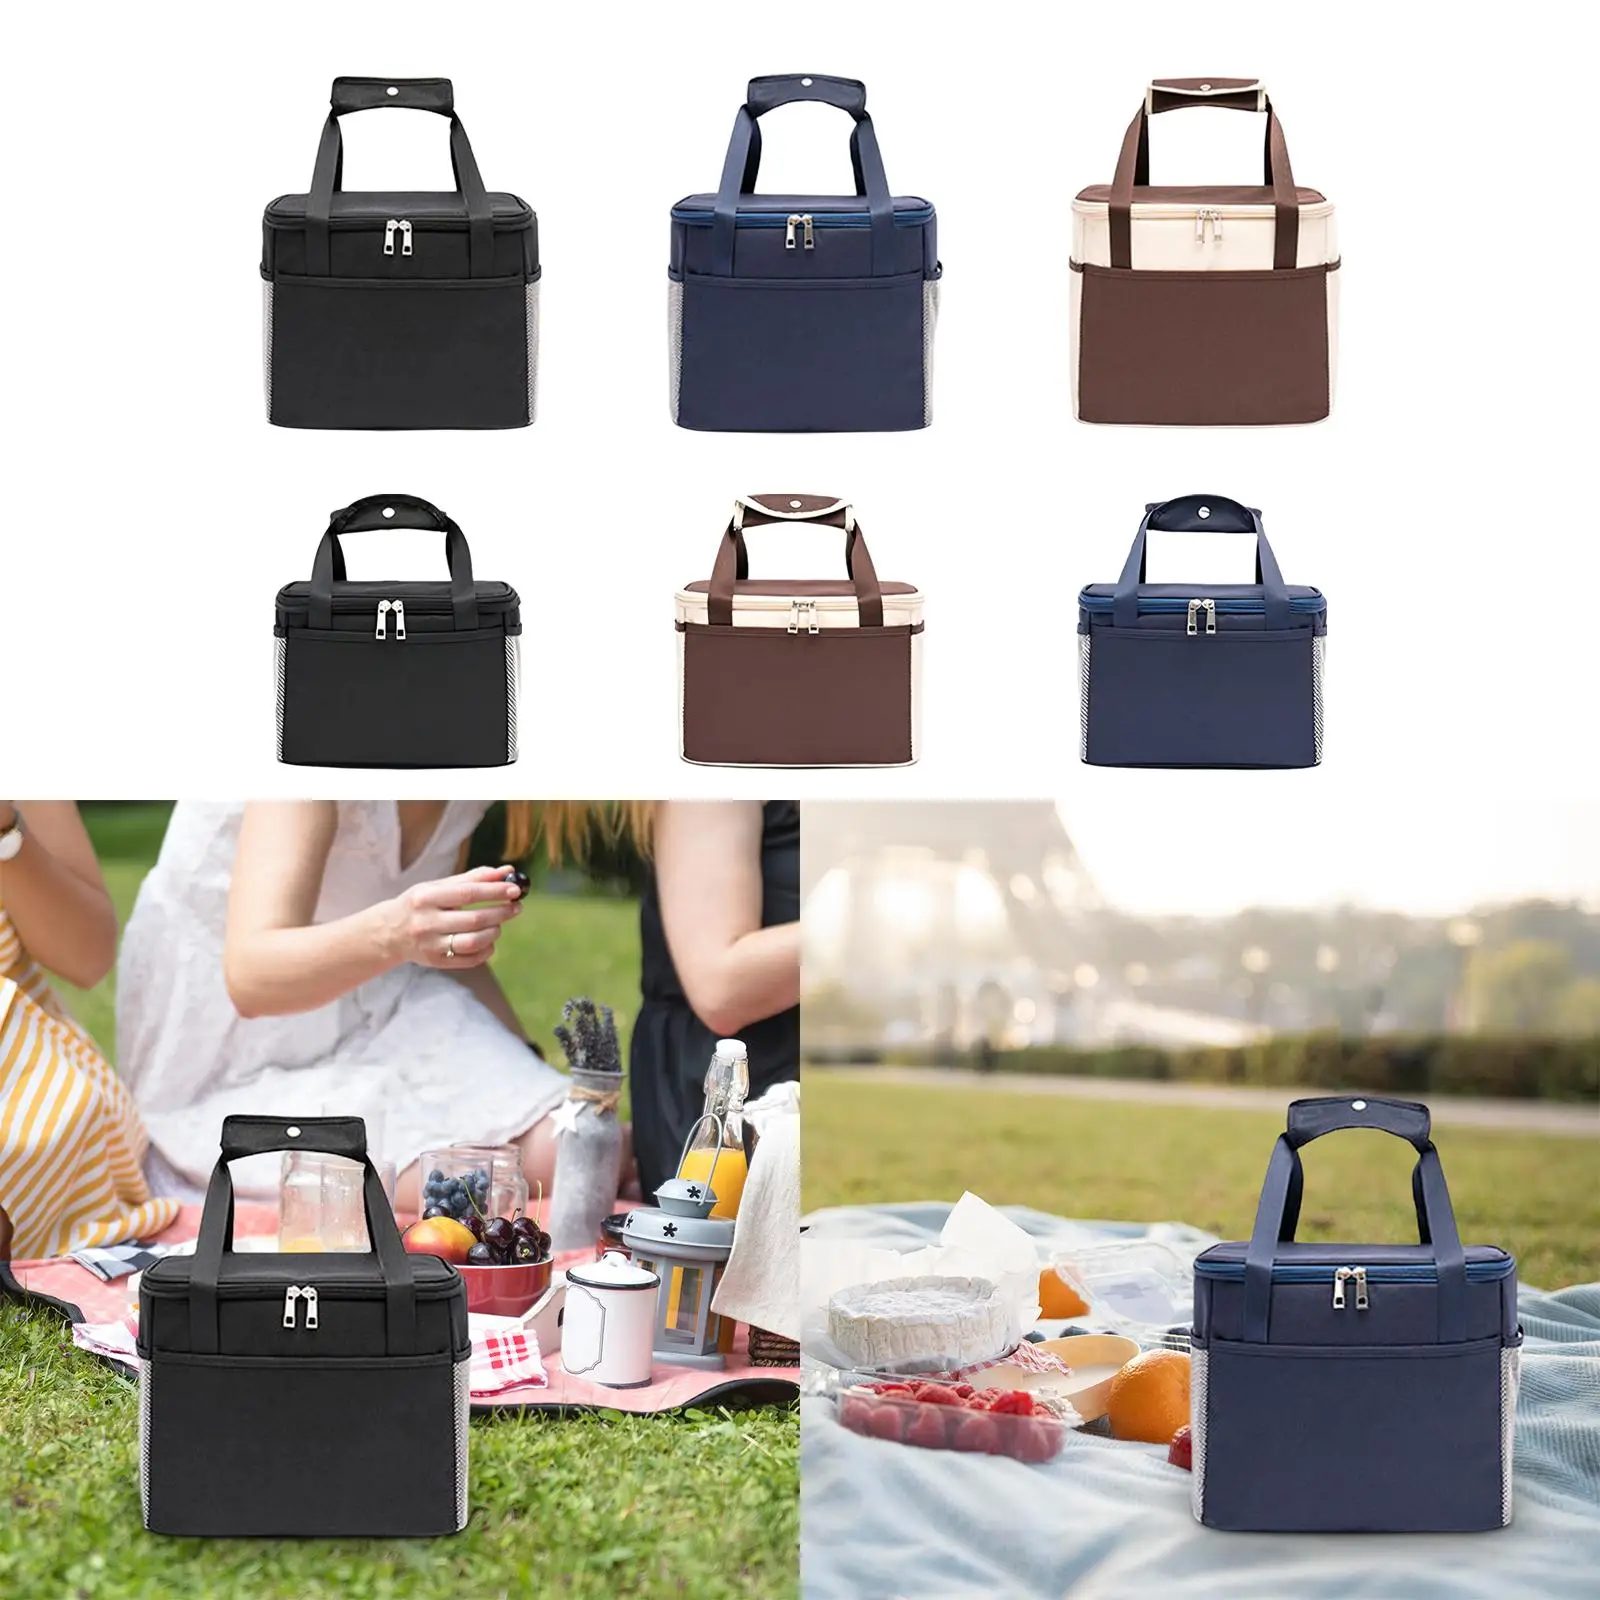 Insulated Cooler Bag Thermal Food Carrier Reusable Thickened Insulated Lunch Bag for Outdoor Travel Camping Office Women and Men